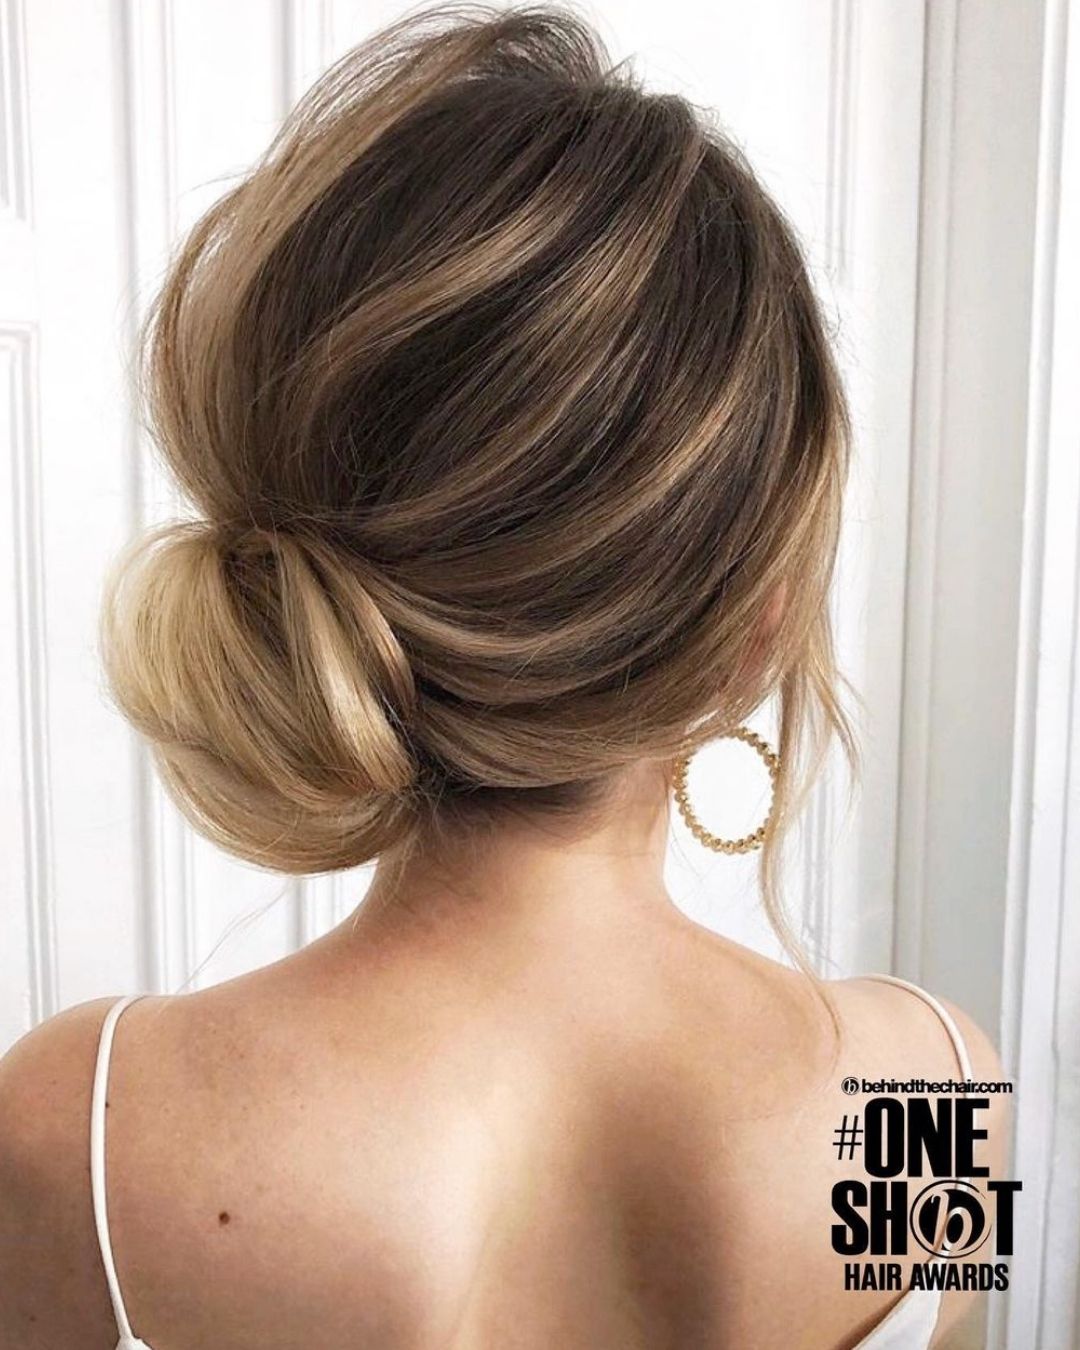 side buns wedding hairstyles easy side bun hairstyles2